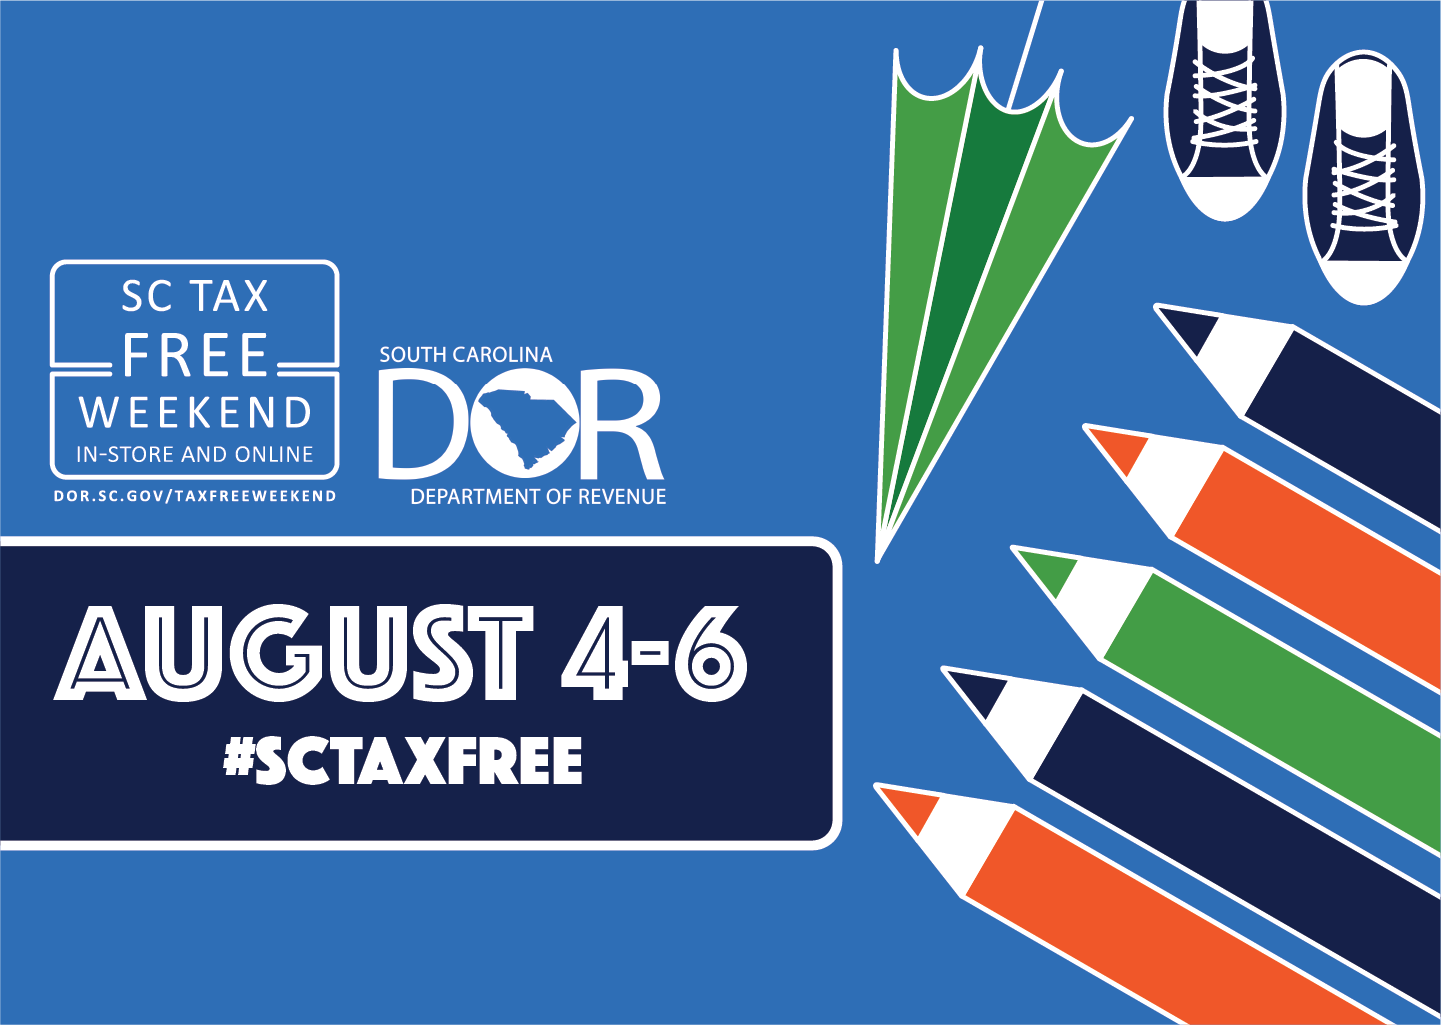 SC Tax Free weekend dates announced